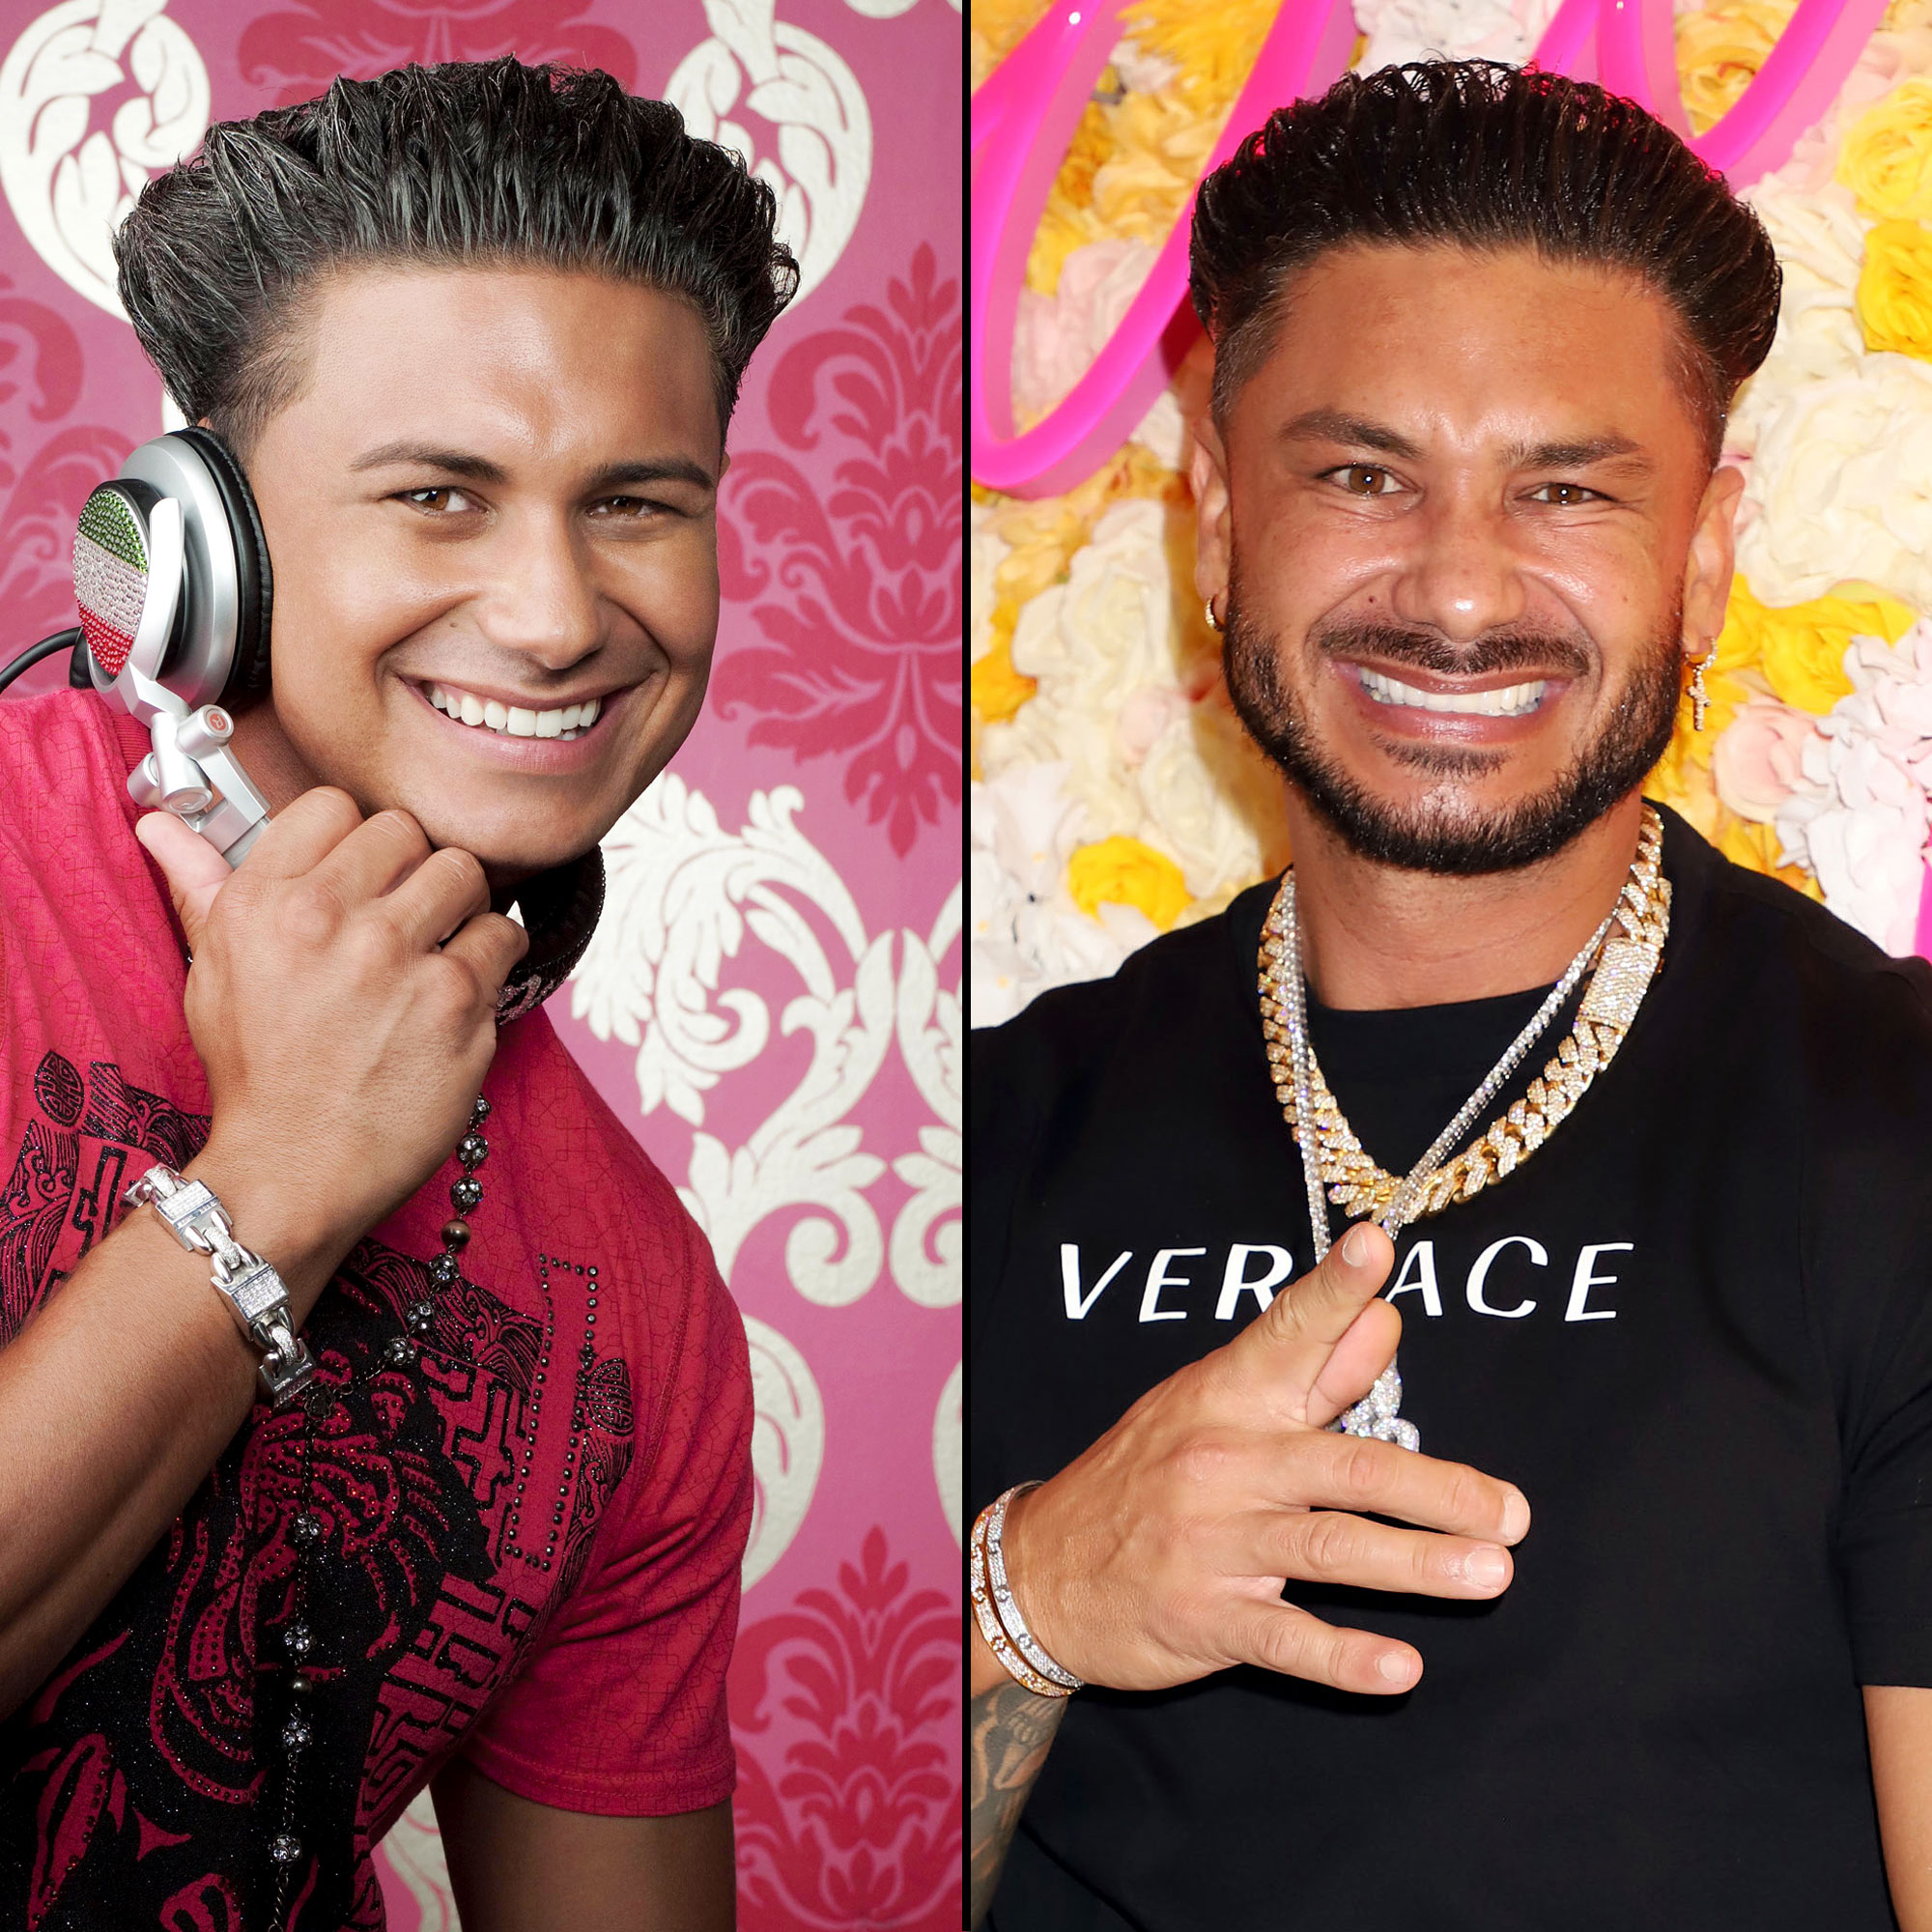 We Dressed Like The Cast Of Jersey Shore For A Week And Here's